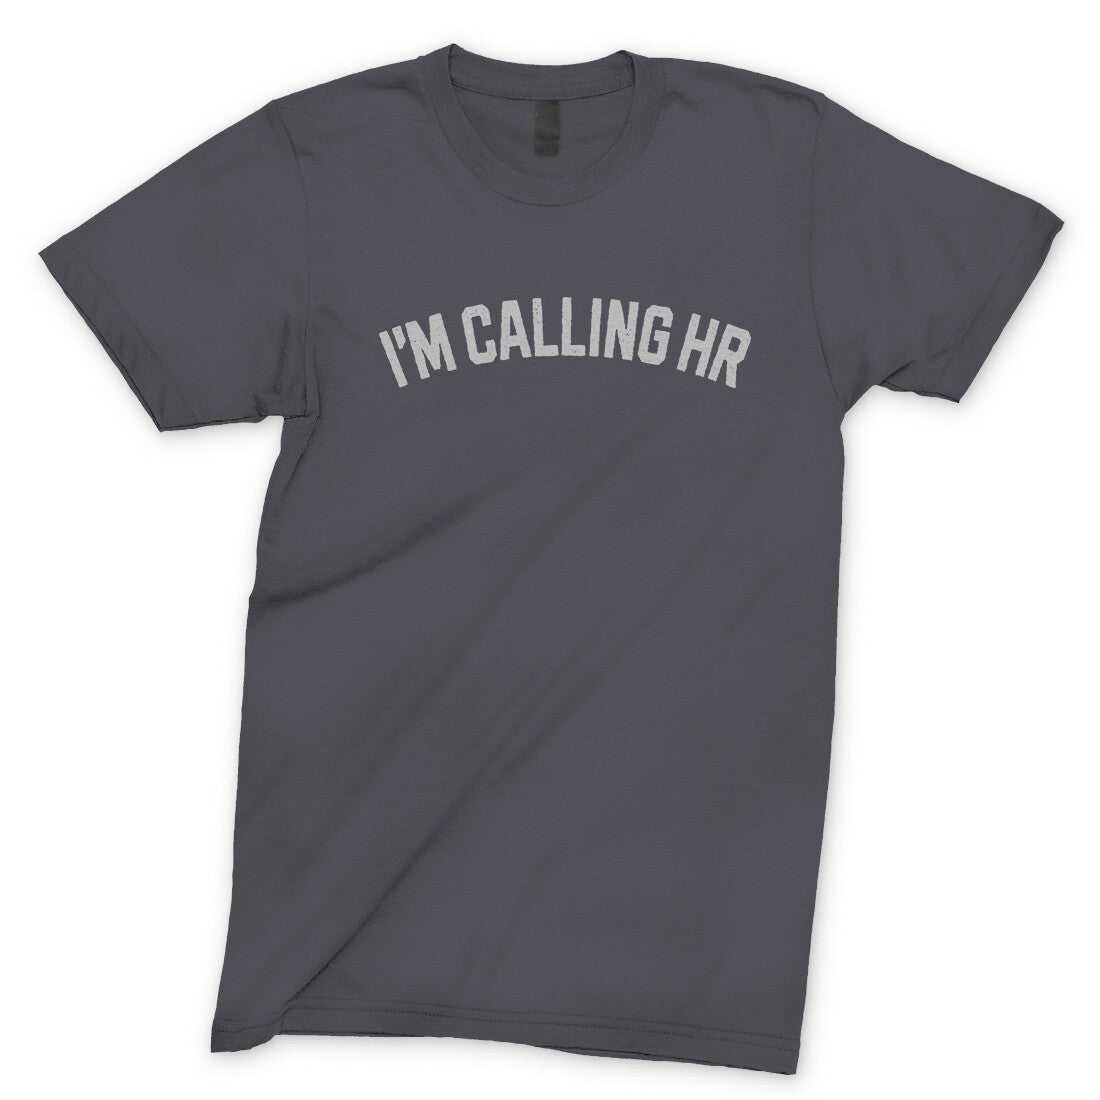 I'm Calling HR in Charcoal Color